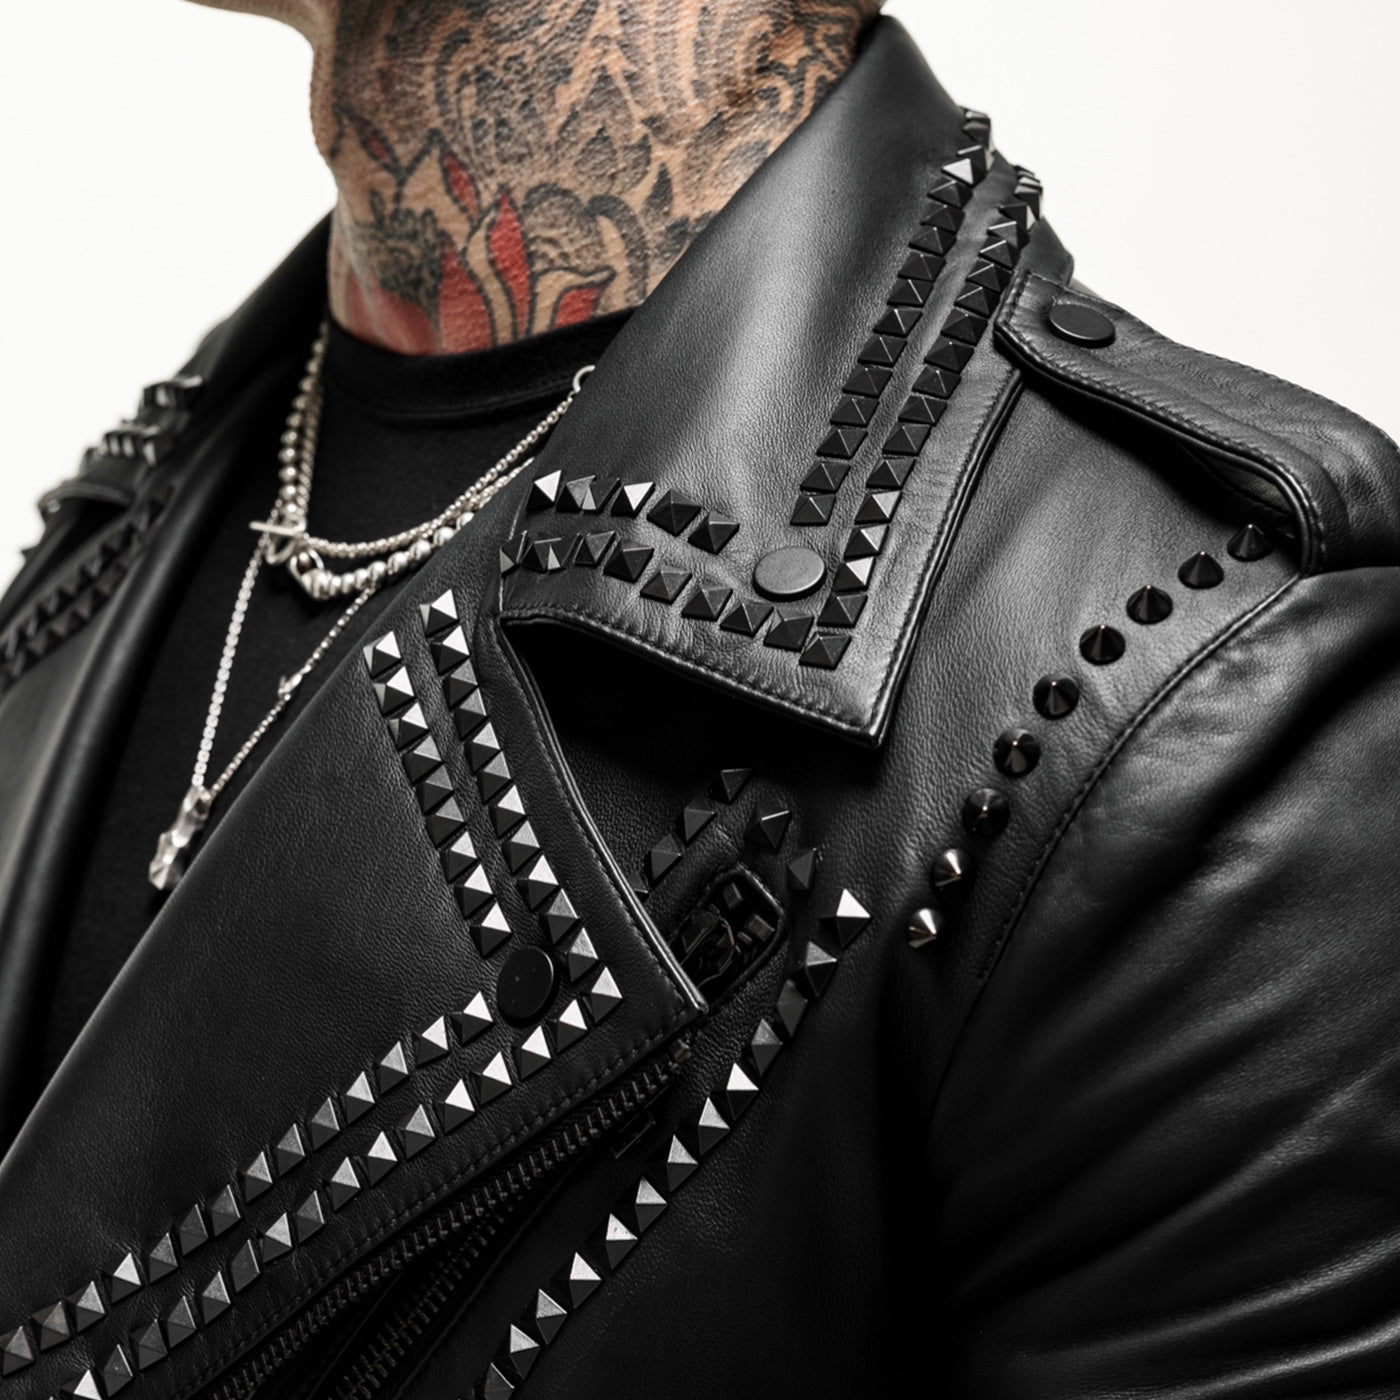 Printed Raving Wolf Studded Leather Jacket